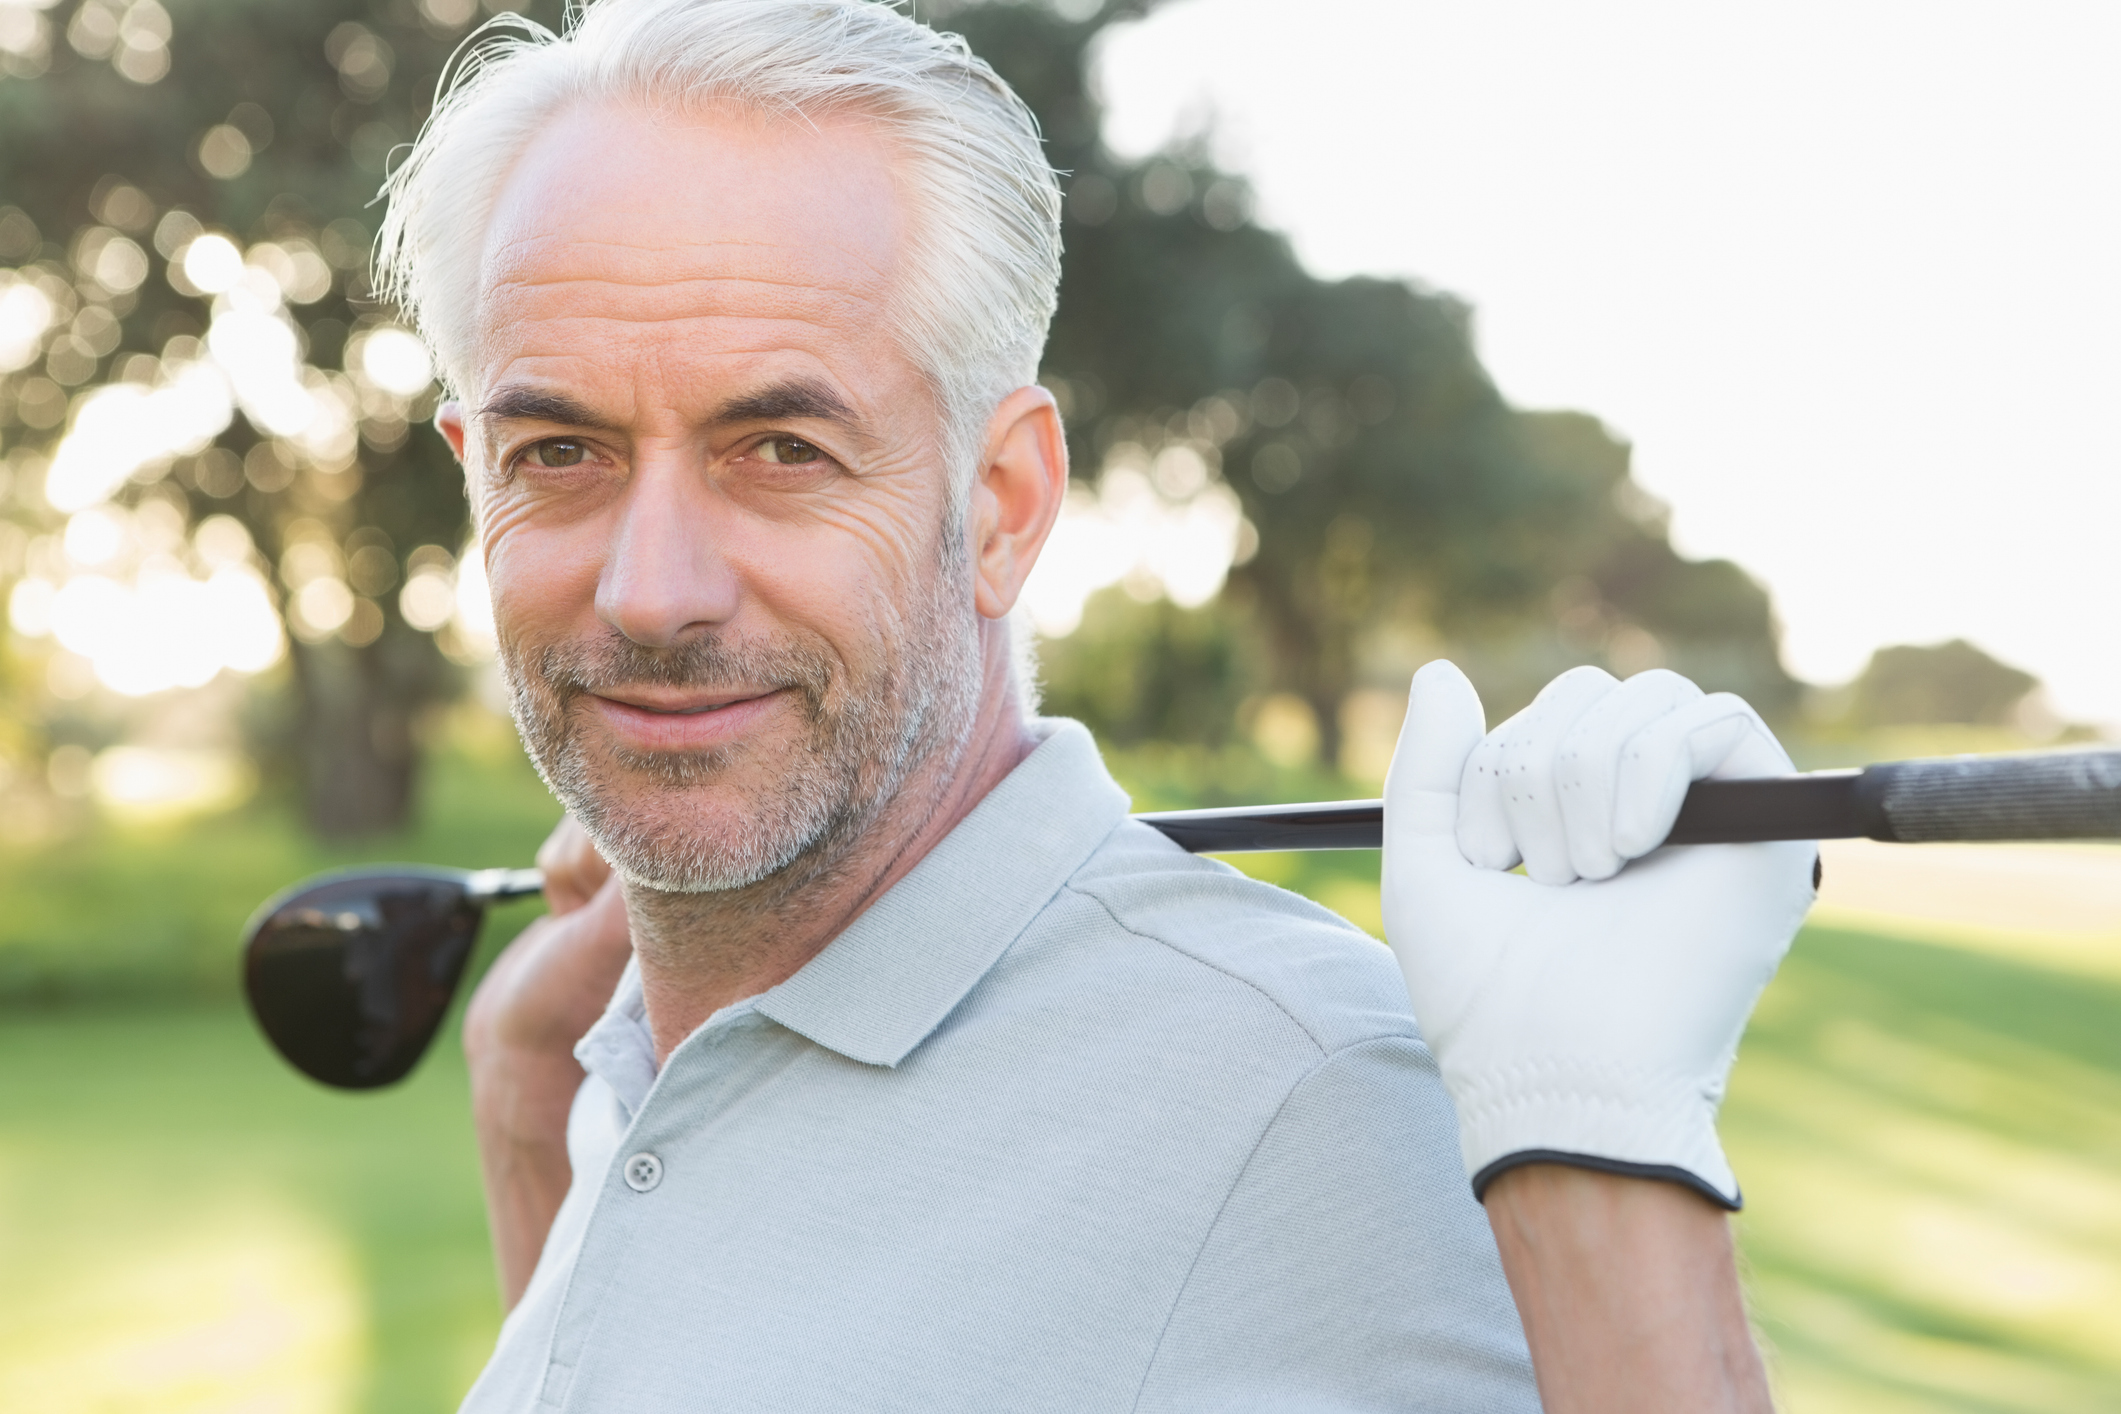 Walk or golf: The best exercise for a healthy heart over 65